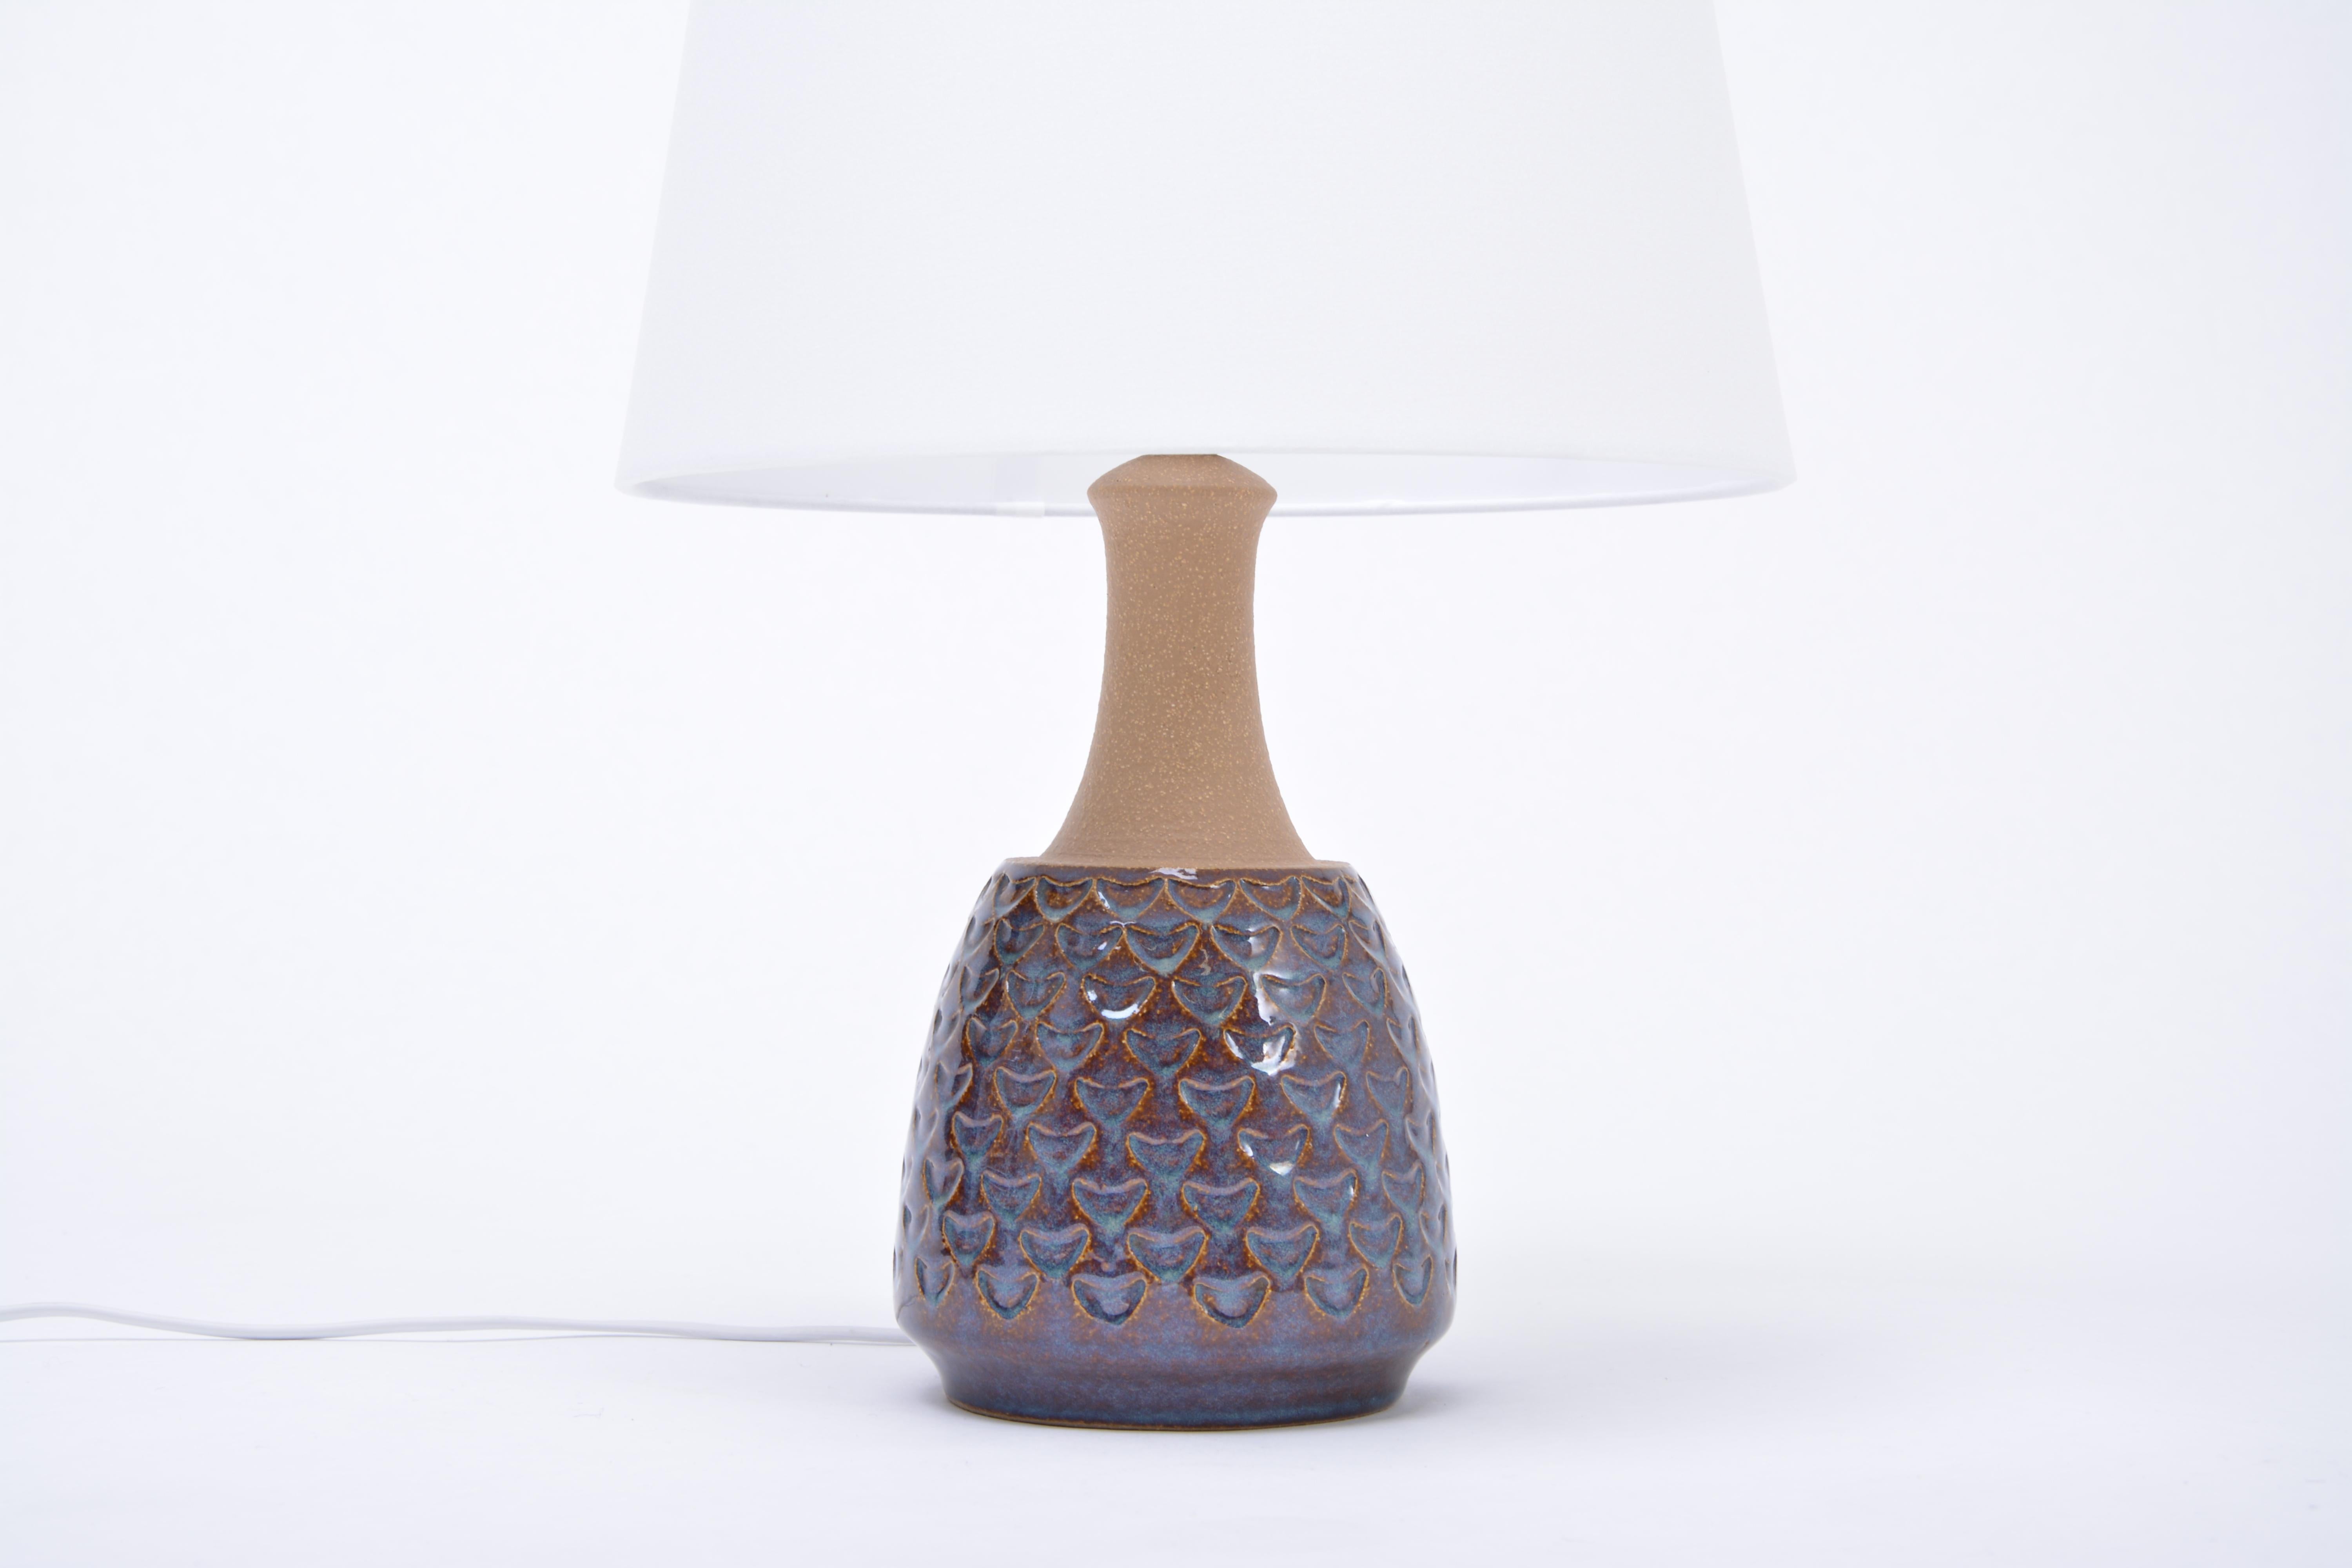 Handmade Danish Mid-Century Modern Stoneware lamp by Soholm
Table lamp handmade of stoneware with ceramic glazing in tones of blue. Graphical pattern to the base of the lamp. Produced by Danish company Soholm. The lamp has been rewired for European